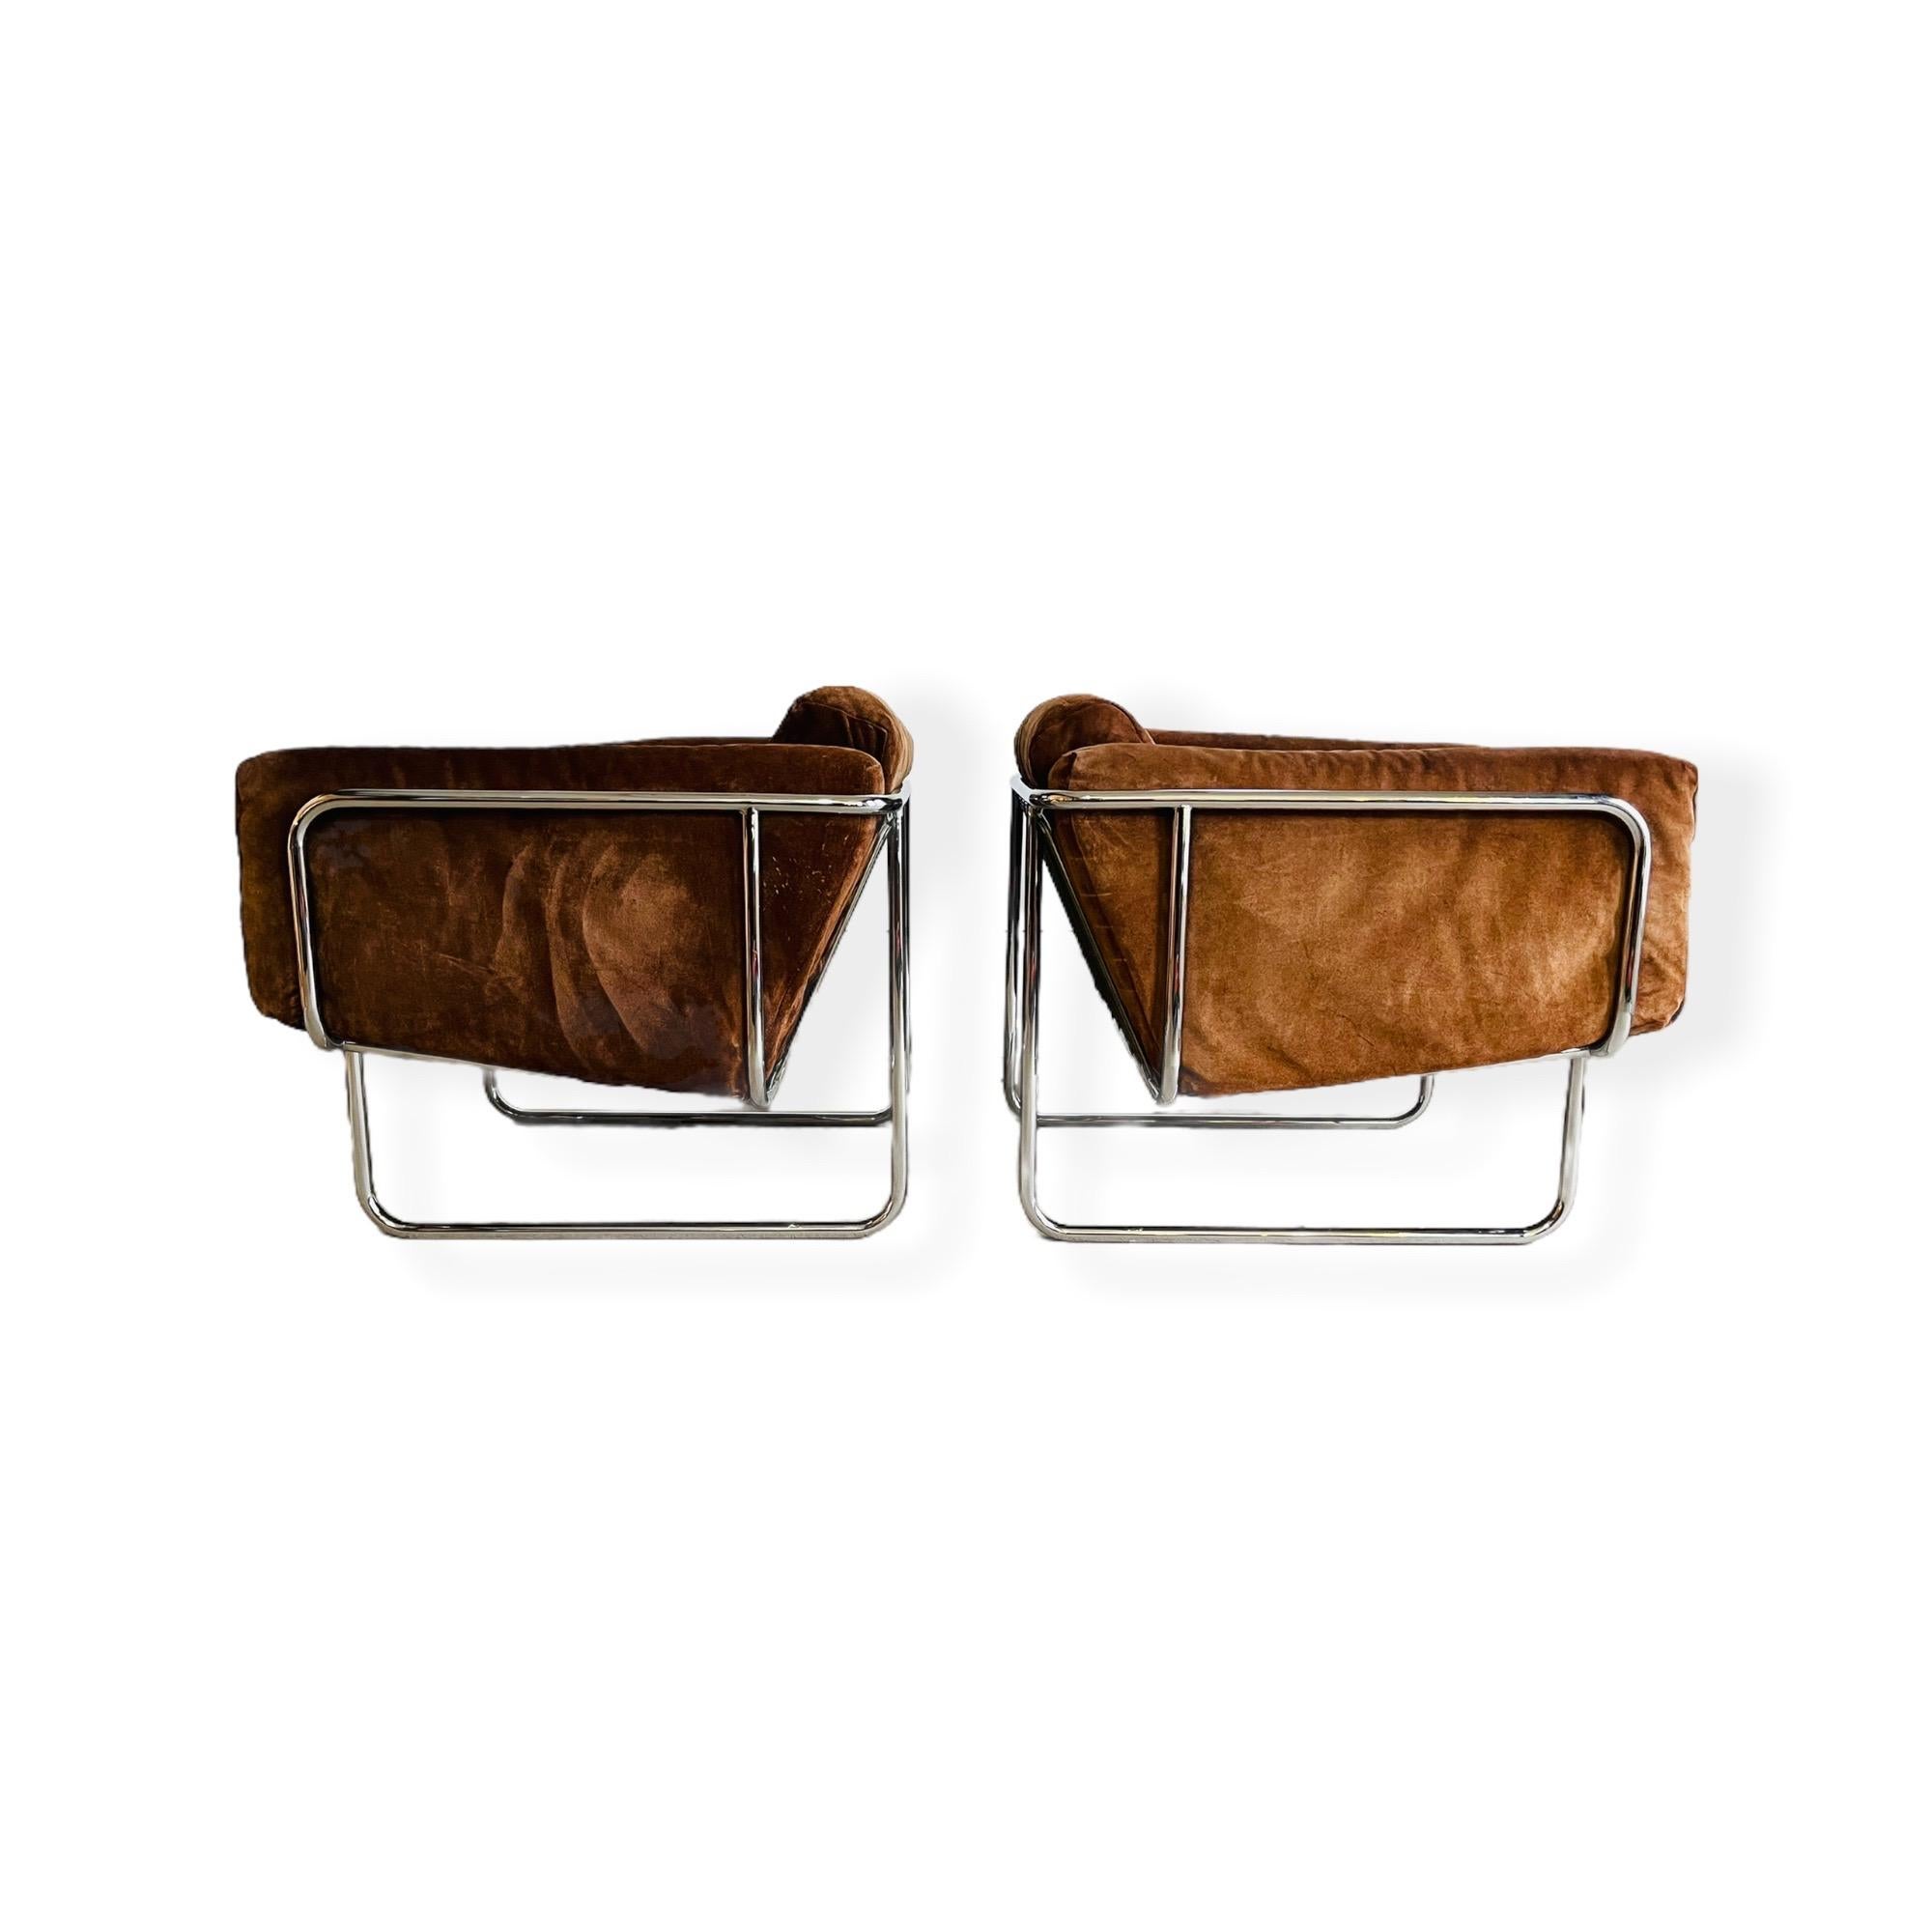 Here is a vintage Danish modern tubular chrome lounge chairs by Hans Elchenberger of Denmark circa 1960s. These gorgeous chairs have original brown suede upholstery with minor wear / patina consistent with age and use. Chrome frame is in good